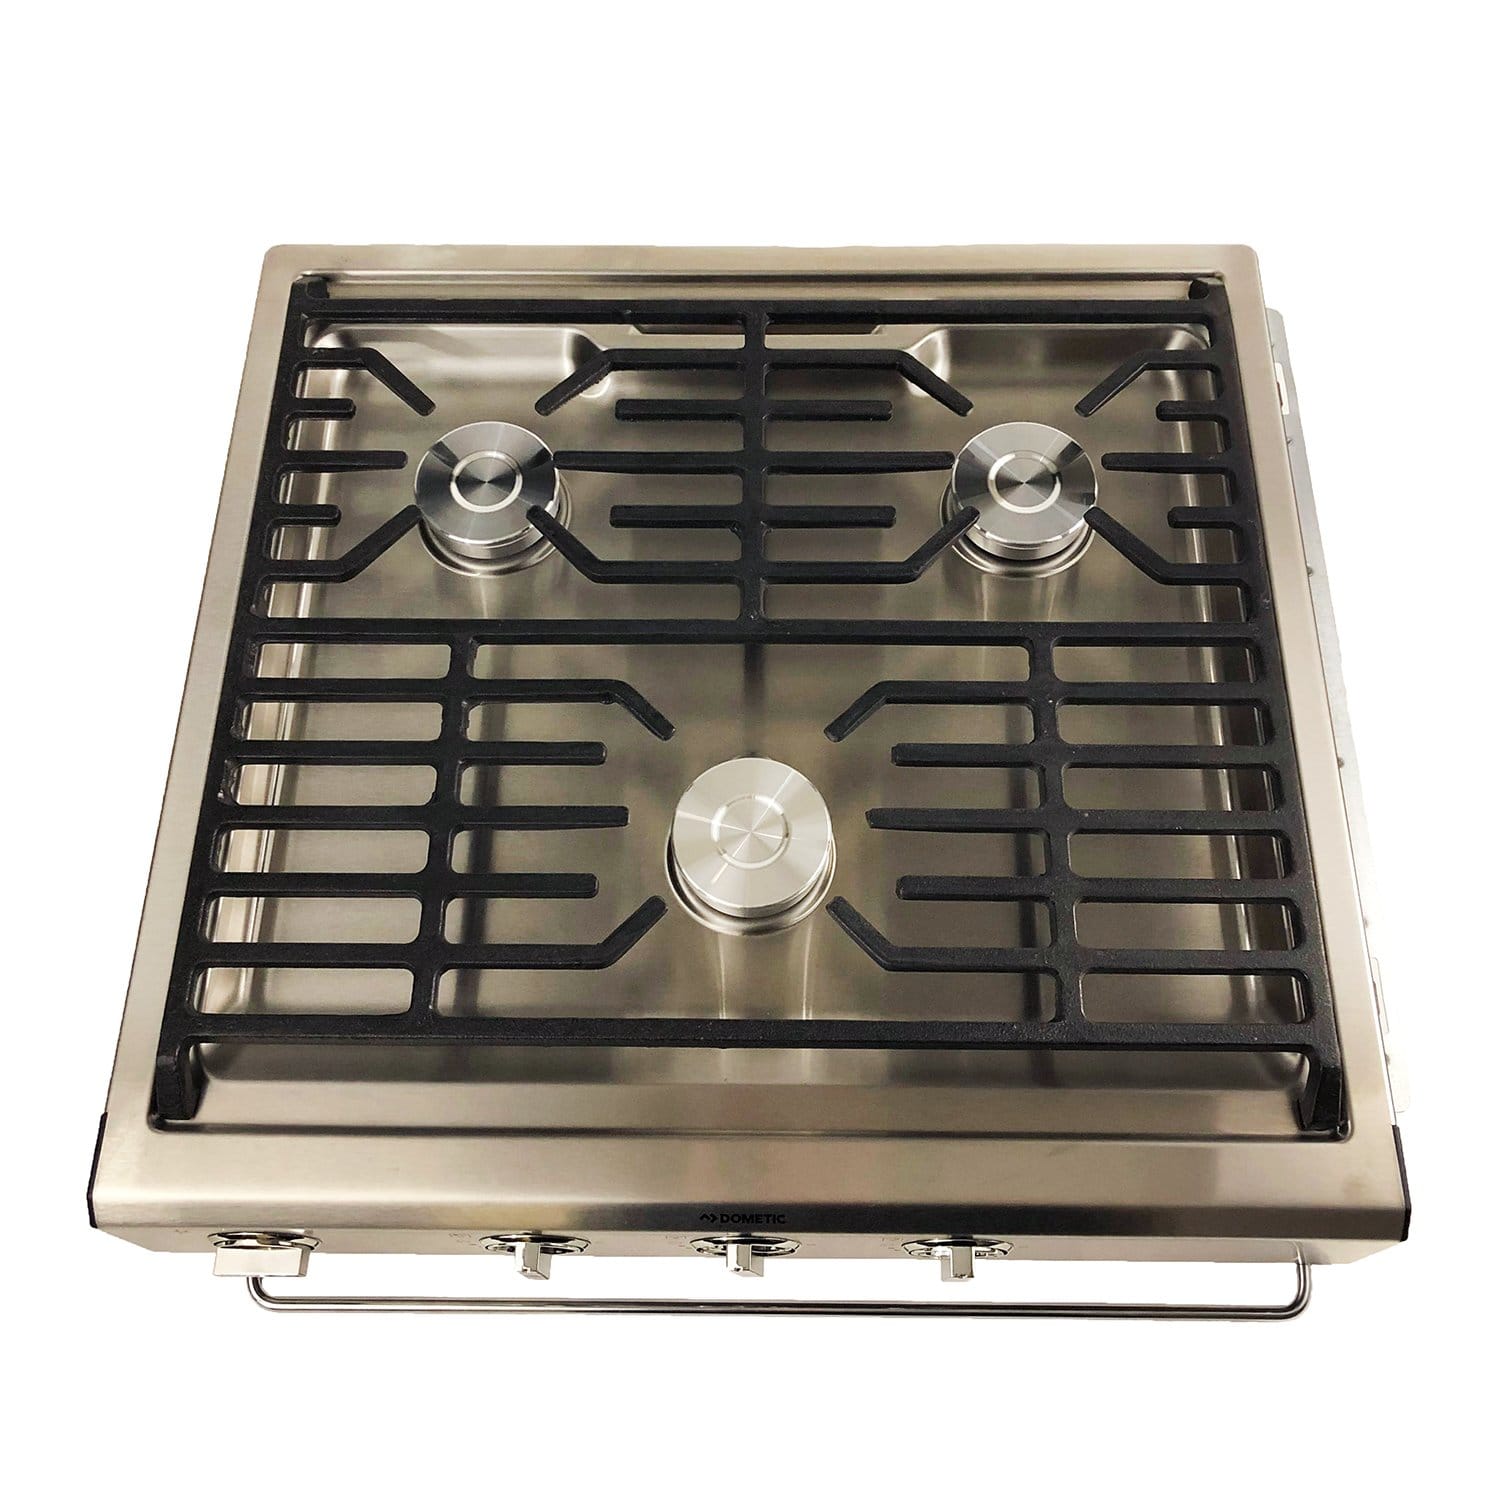 Dometic 50304 Stainless Steel RV Kitchen 3-Burner Cooktop